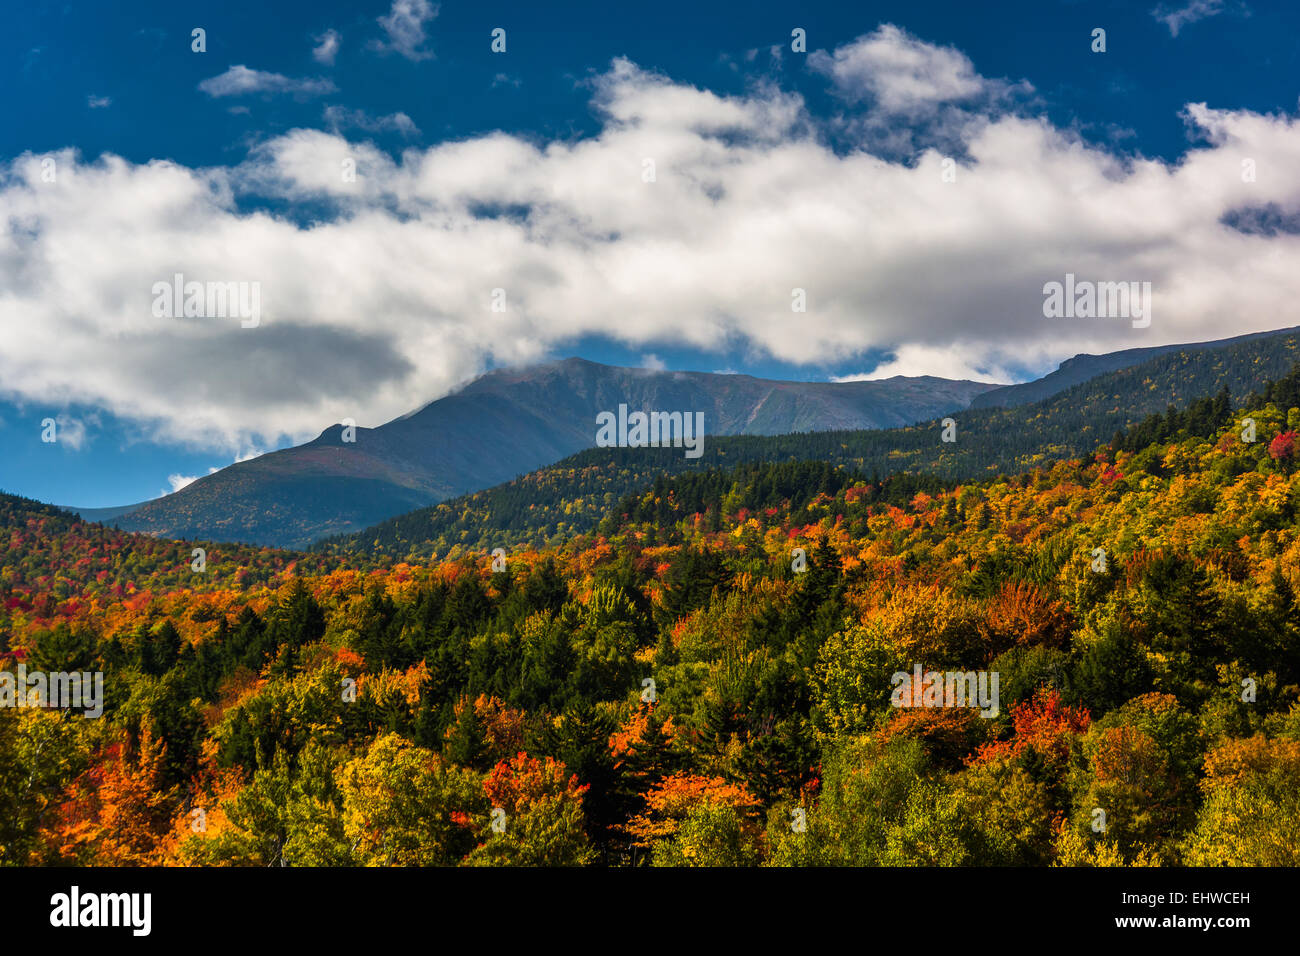 Autumn color and view of the Presidential Range in White Mountain National Forest, New Hampshire. Stock Photo